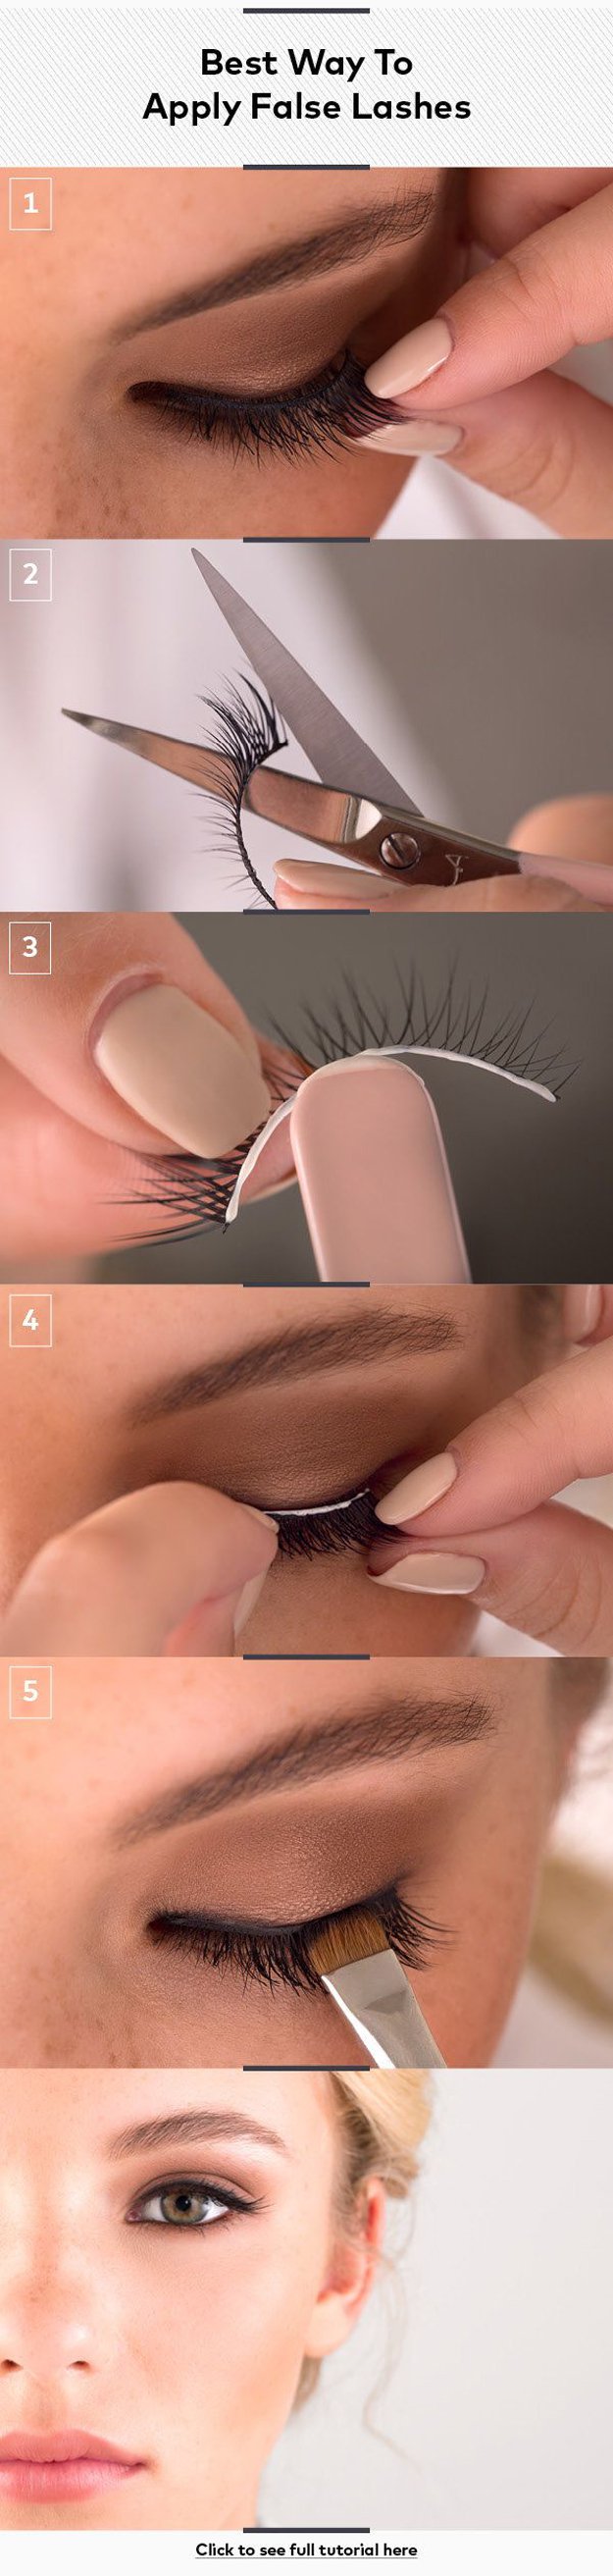 Best Way to Apply False Lashes